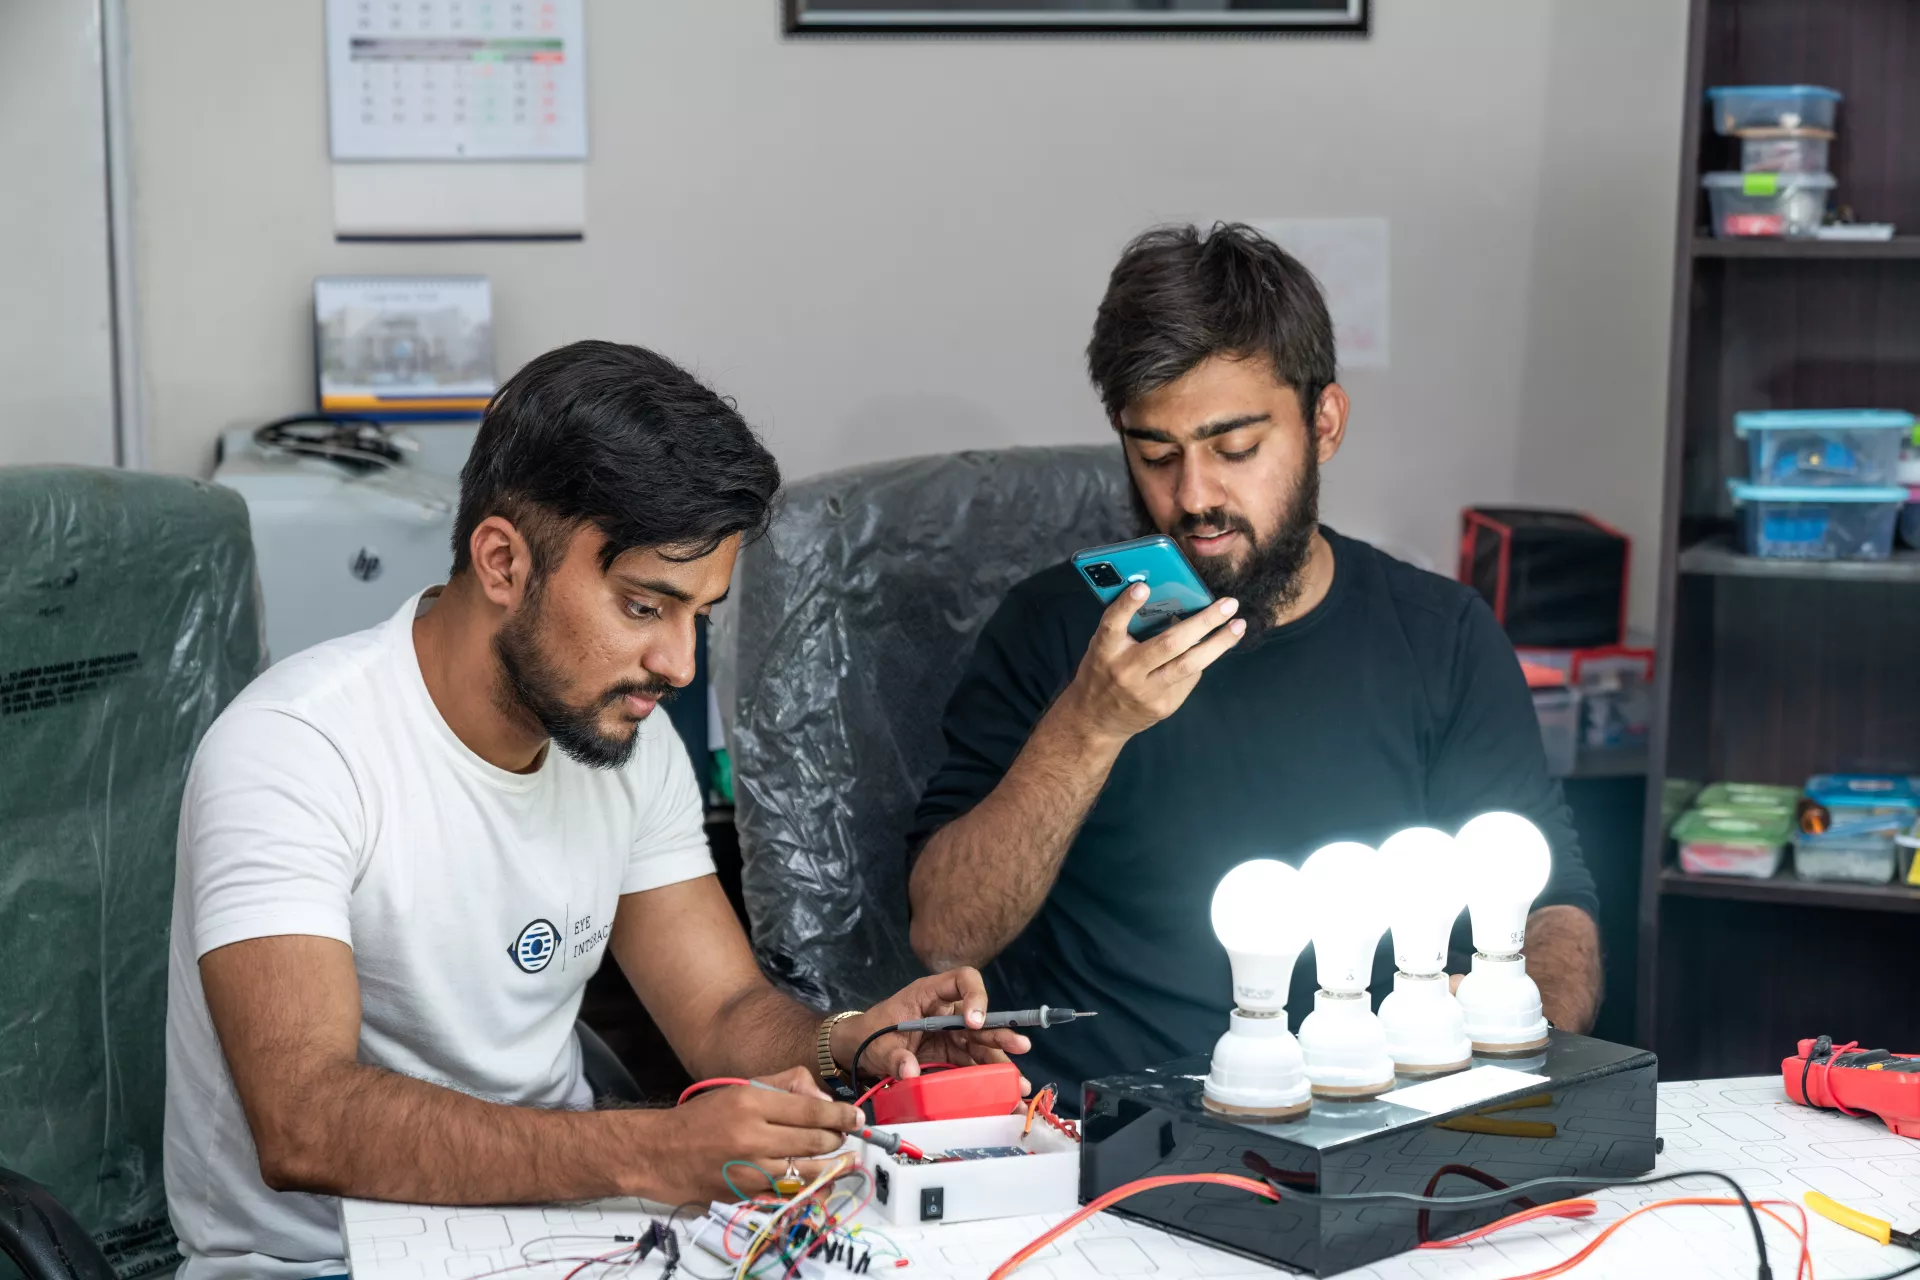 Captured in this photo are the bright minds of the winners of the Imagen Ventures Youth Challenge, as they experiment with light bulbs and technology